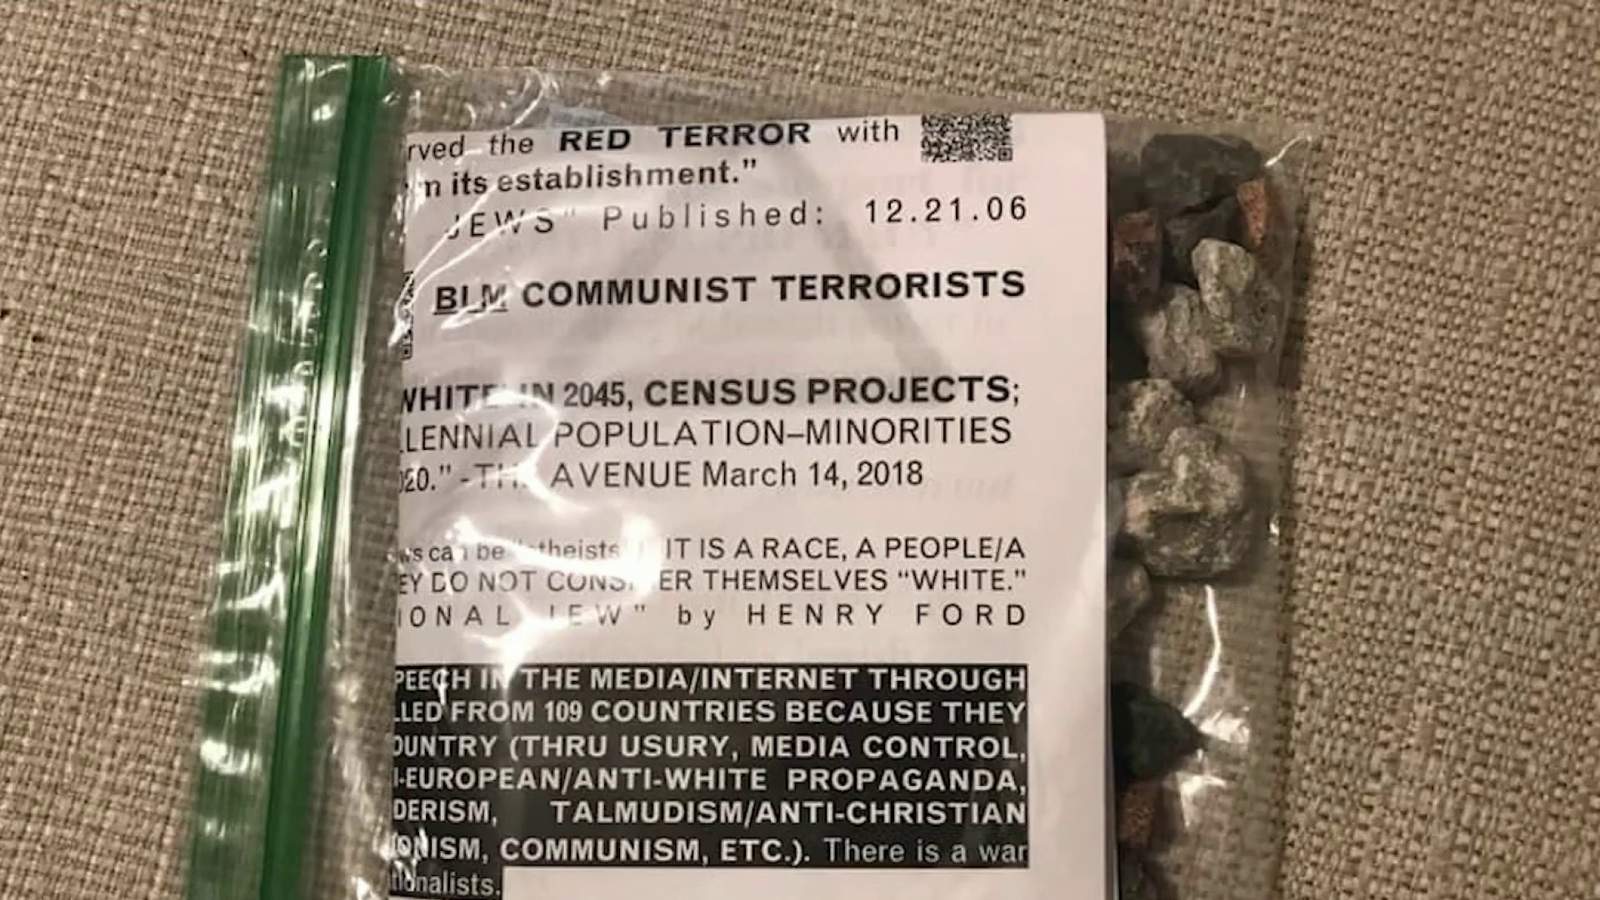 Satellite Beach residents find anti-Semitic tracts about Antifa, BLM near synagogue